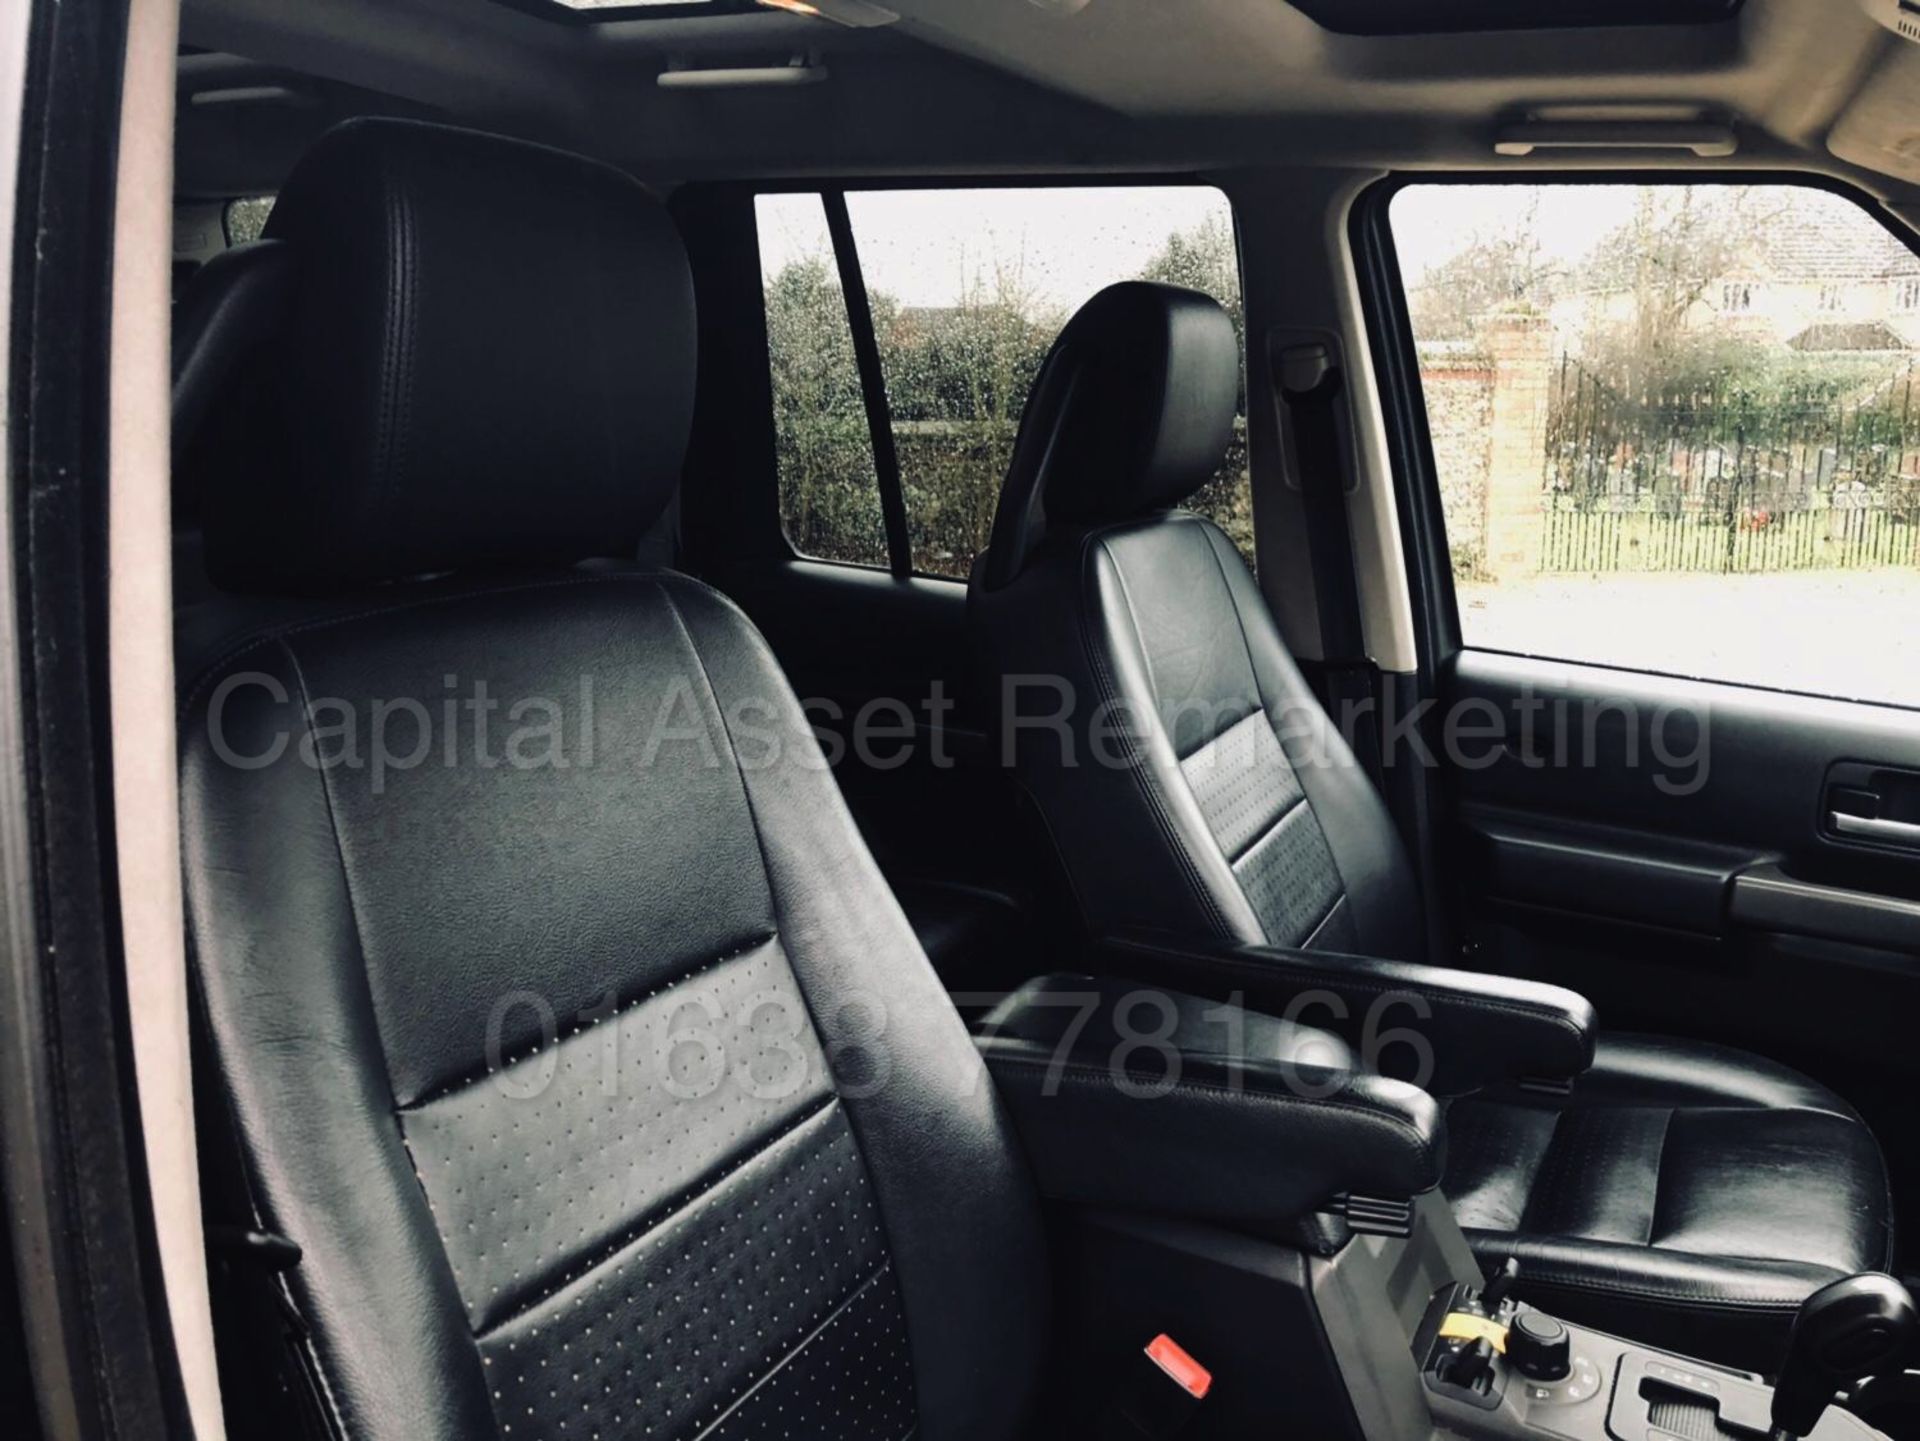 (On Sale) LAND ROVER DISCOVERY 3 'HSE' (2007 MODEL) 'TDV6 - AUTO - LEATHER - SAT NAV' *HUGE SPEC* - Image 32 of 51